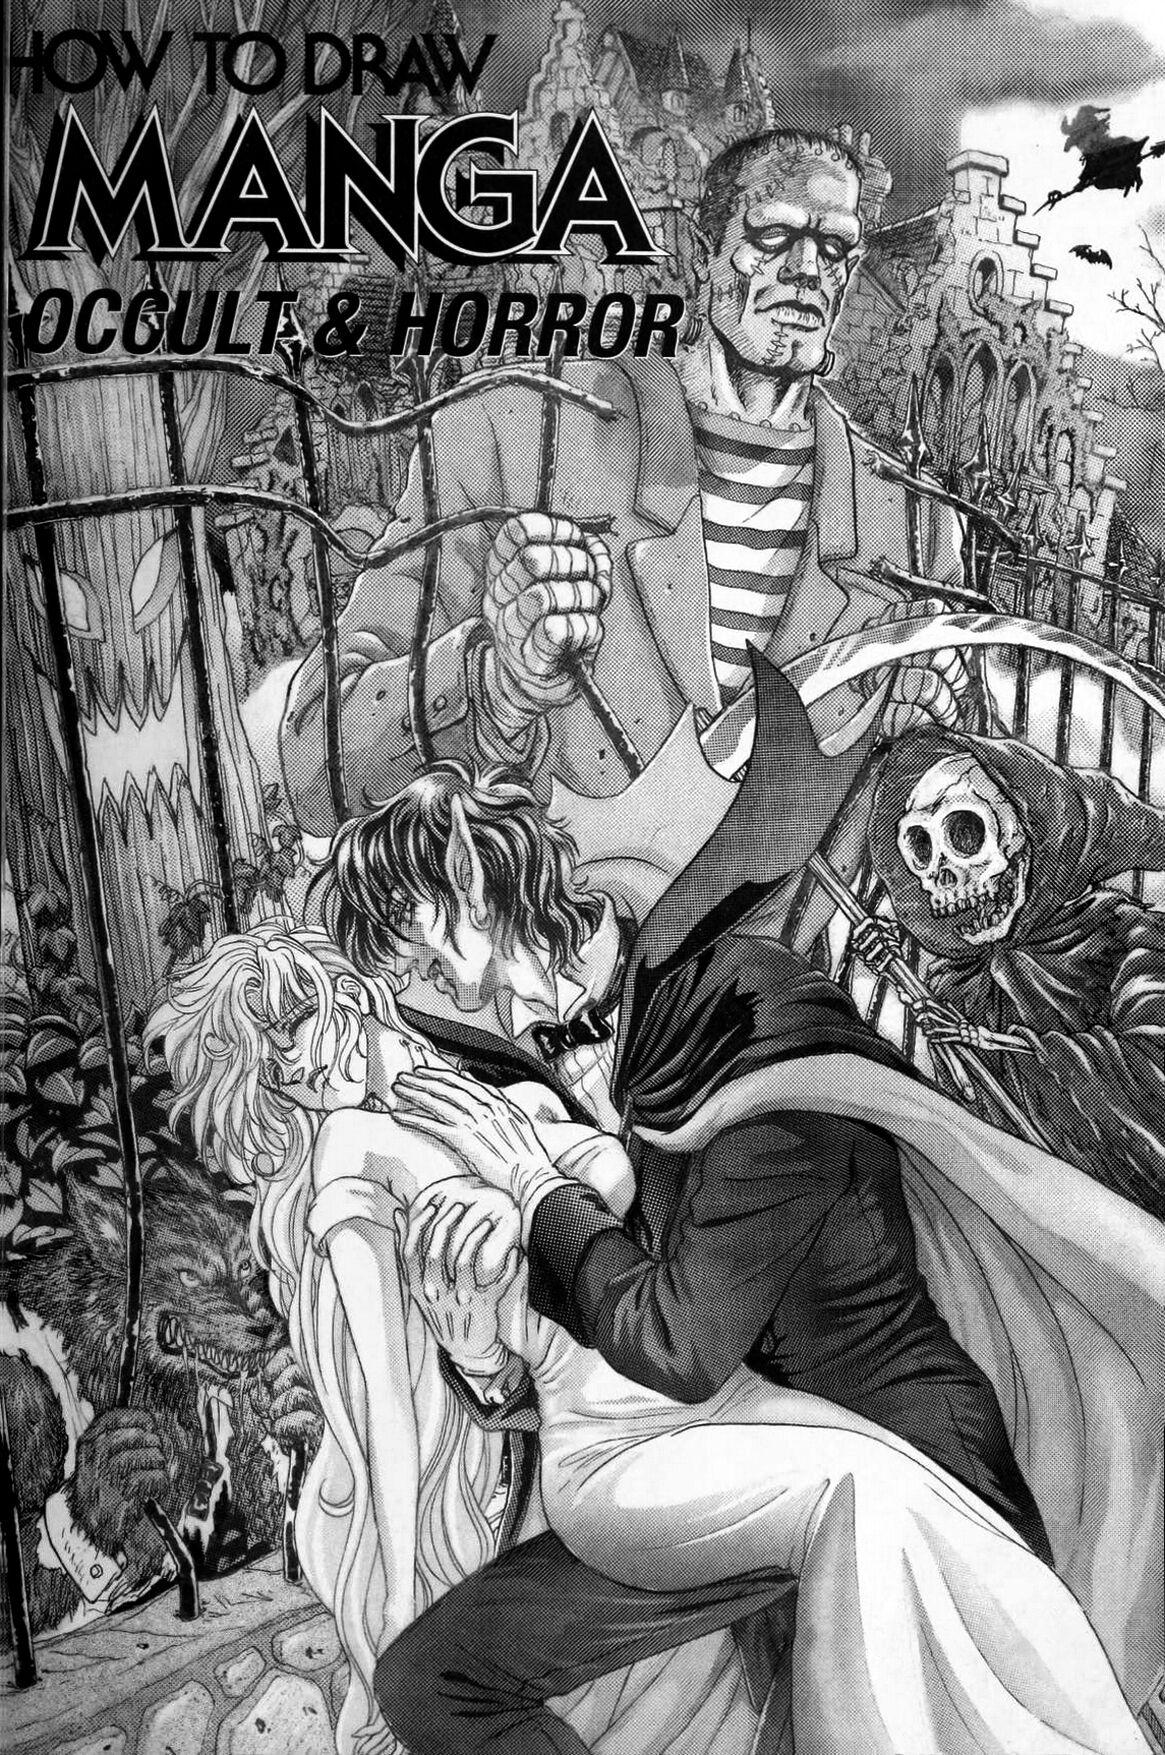 Blow Job Contest How to Draw Manga Vol. 24, Occult & Horror by Hikaru Hayashi Bigcock - Page 5